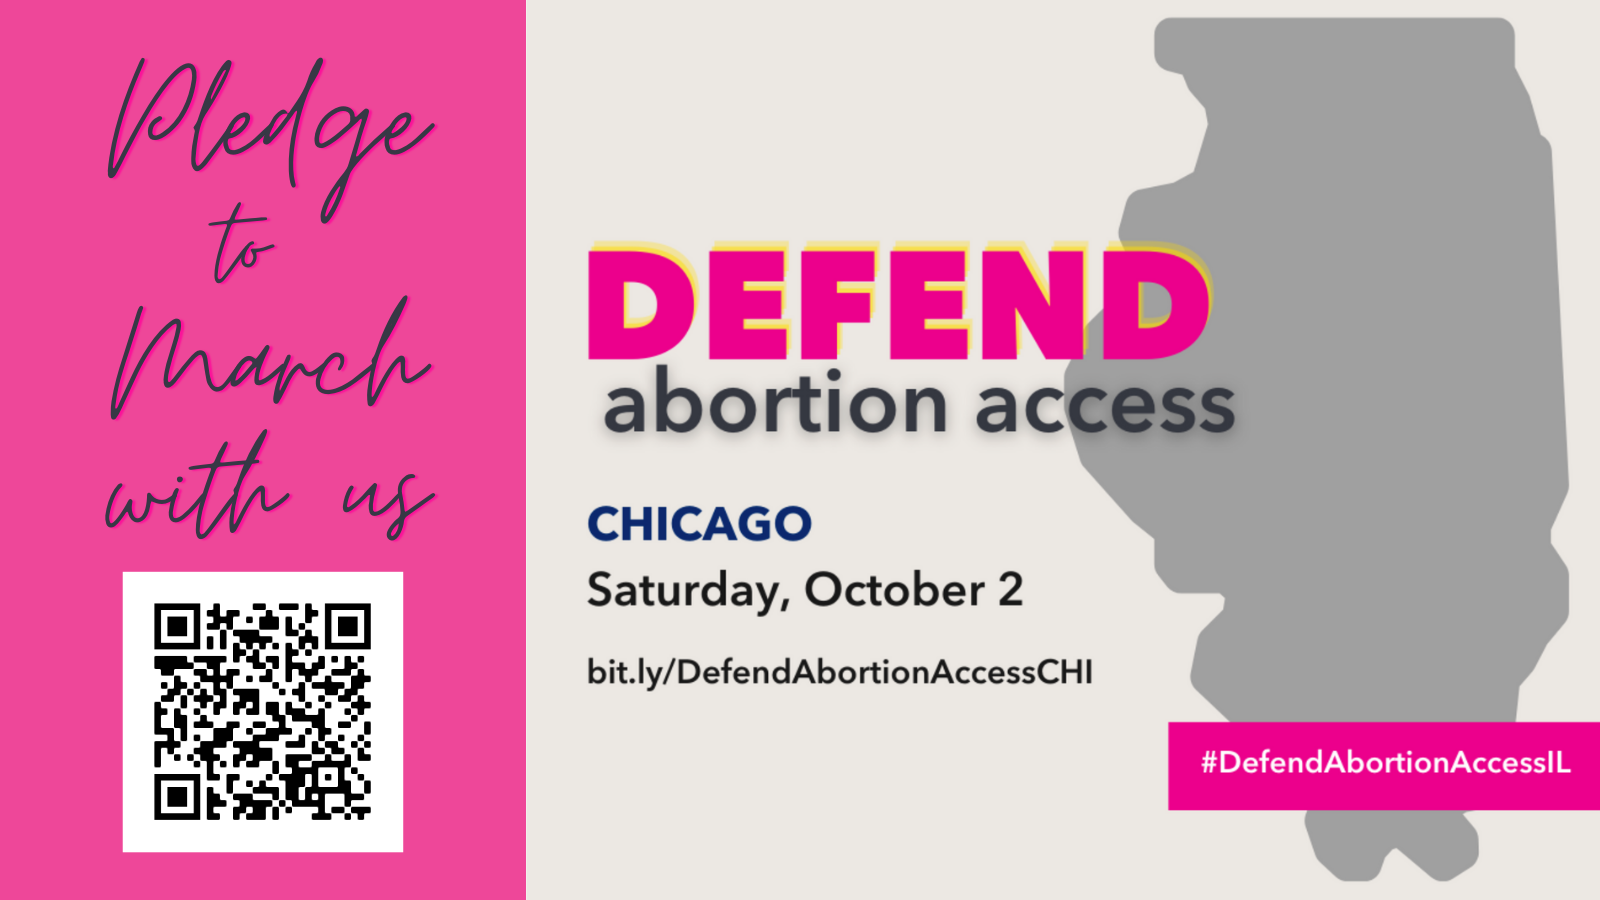 Pink and tan flyer says pledge to march with us, Defend abortion access, Chicago, Saturday, October 2